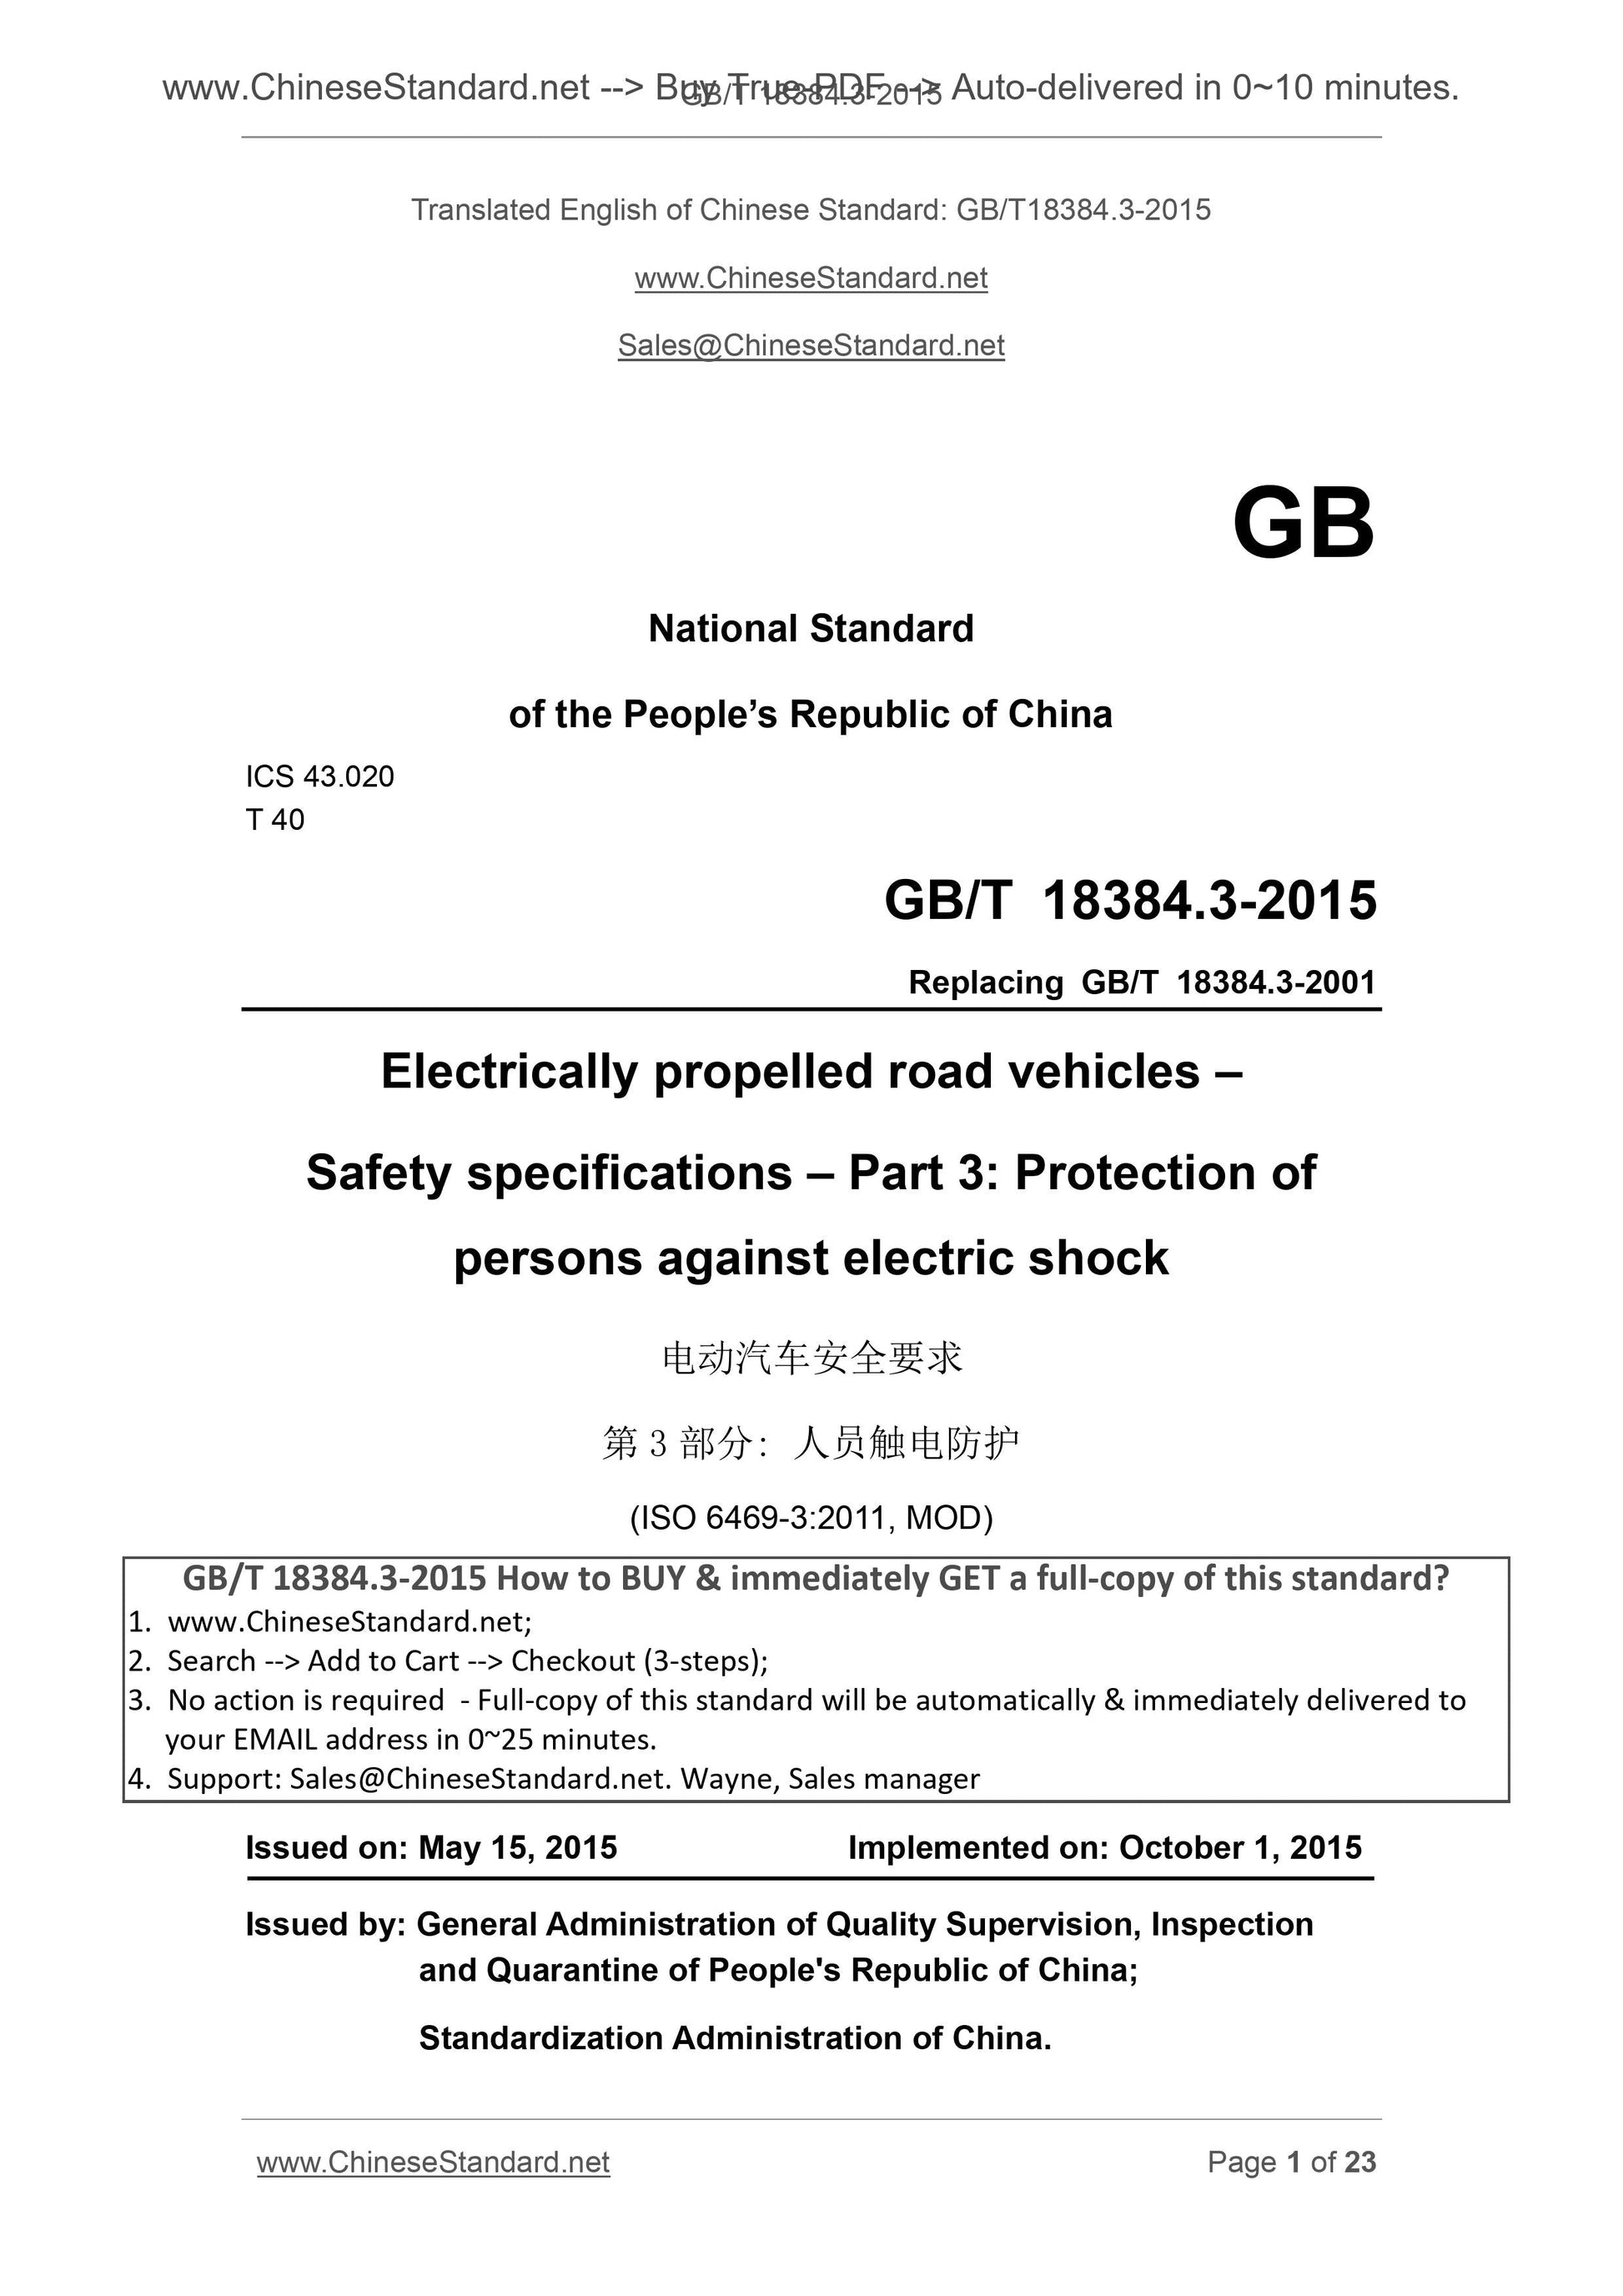 GB/T 18384.3-2015 Page 1